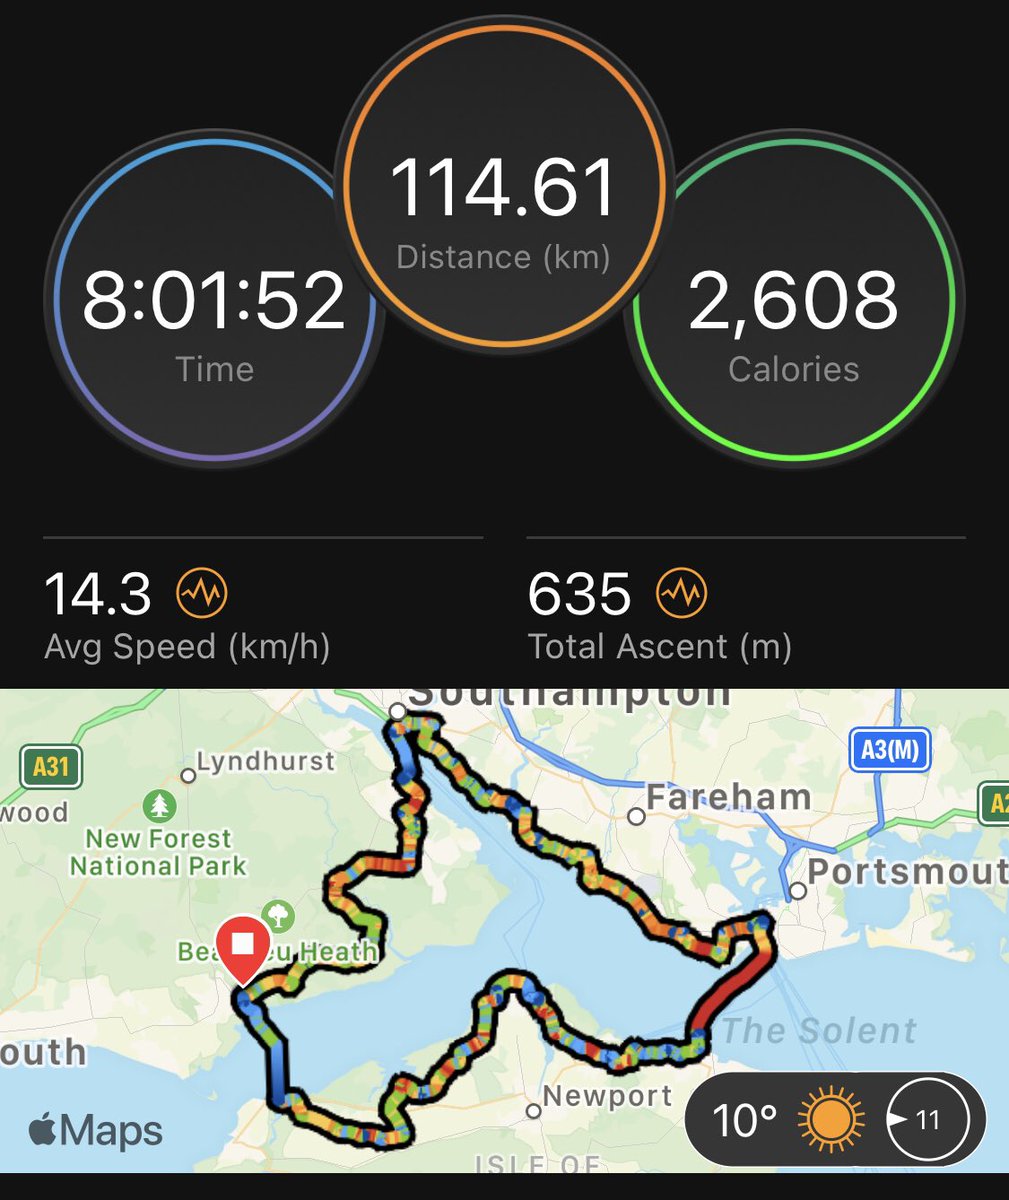 Bike ride for @Dingley completed with @BeckyB_08 yesterday evening taking in 6 Ferries, and a very wet, cold and blustery last leg! @PIandMedNeg #southampton #charitycycle